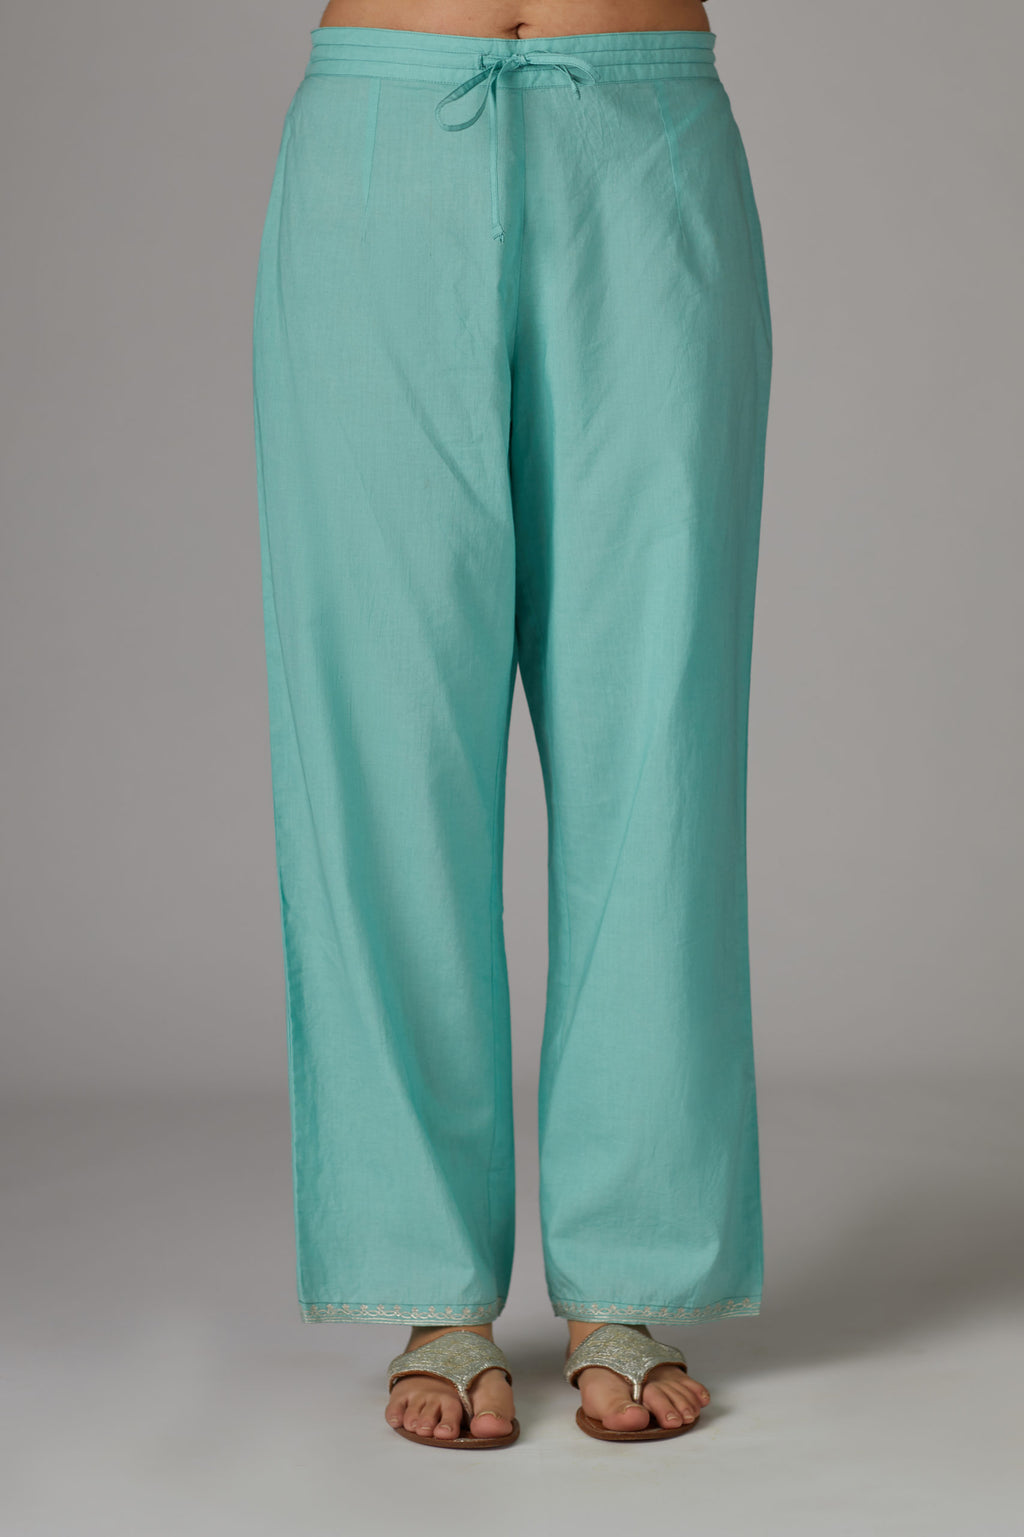 Teal cotton straight pants with aari embroidery at hem